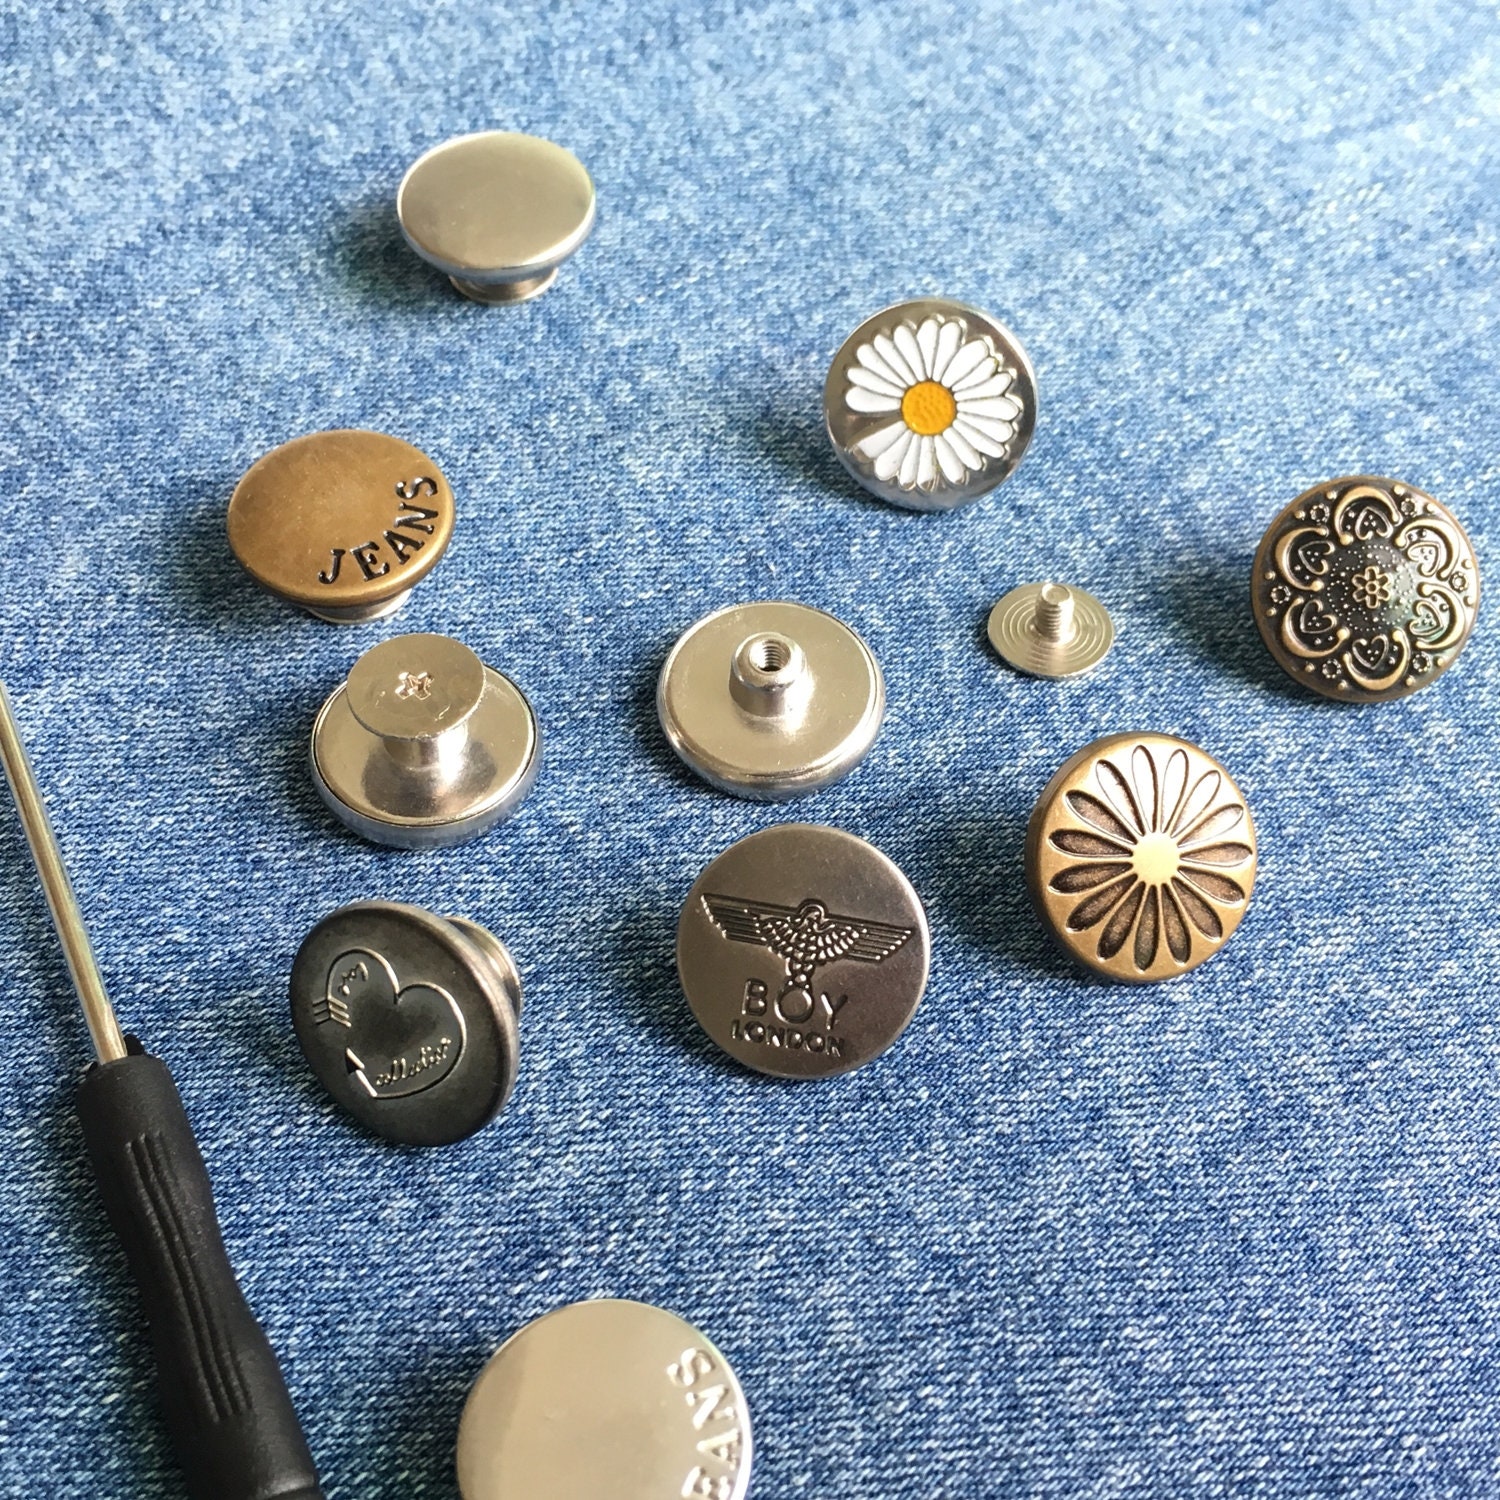 Cheap 10Pcs Jeans Buttons Replacement 17mm No Sewing Metal Button Repair Kit  Nailless Removable Jean Buttons Sewing Accessories